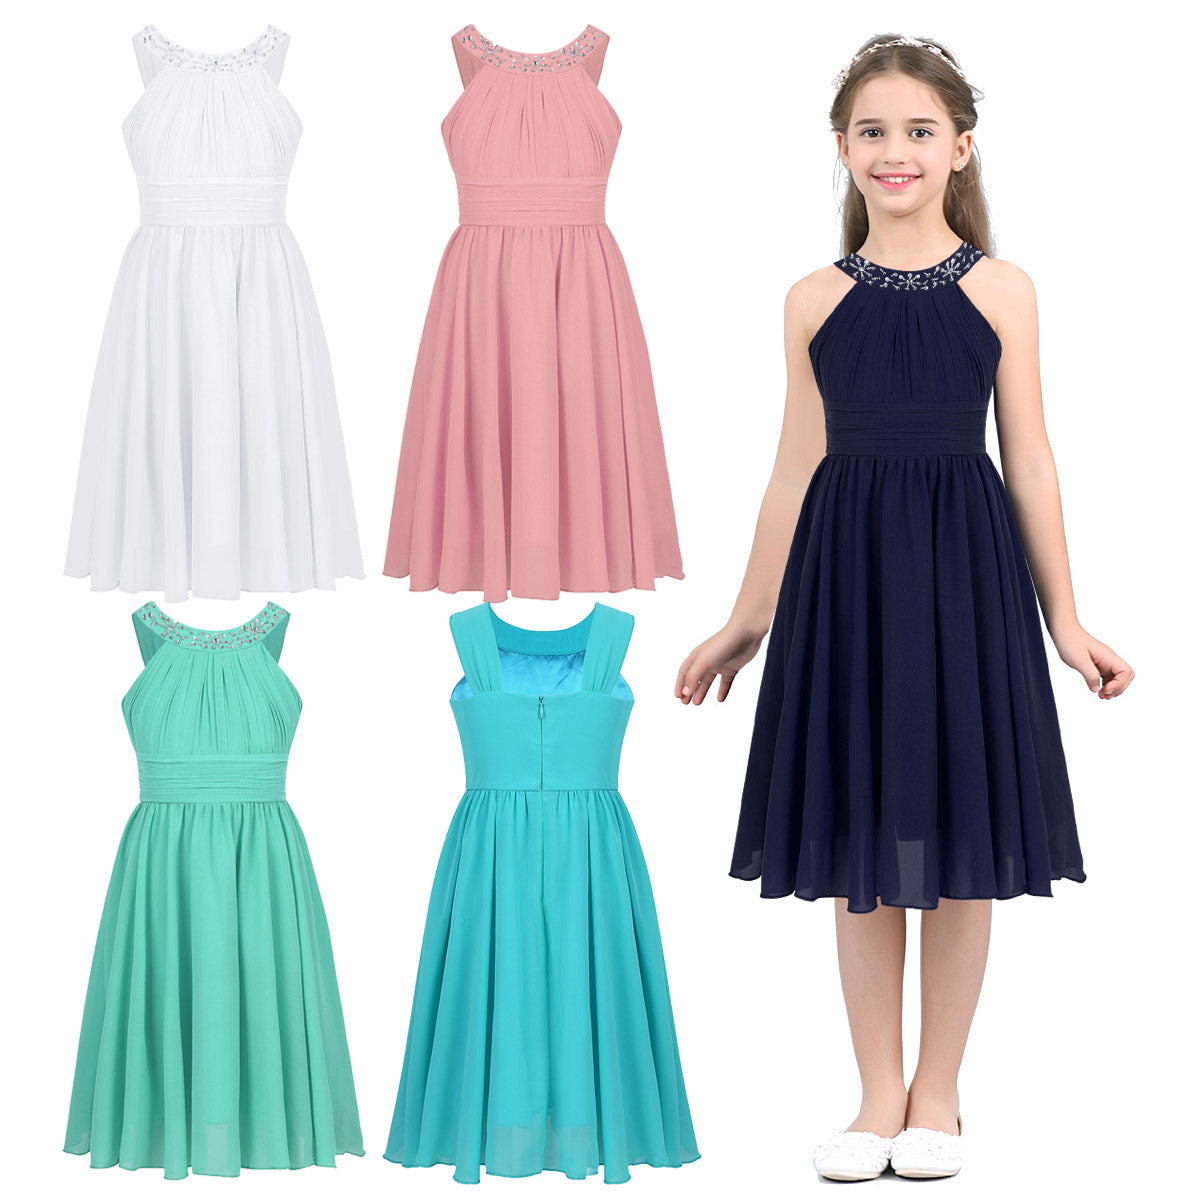 Short white flower girl dress up to age 14 years– Fabulous Bargains Galore